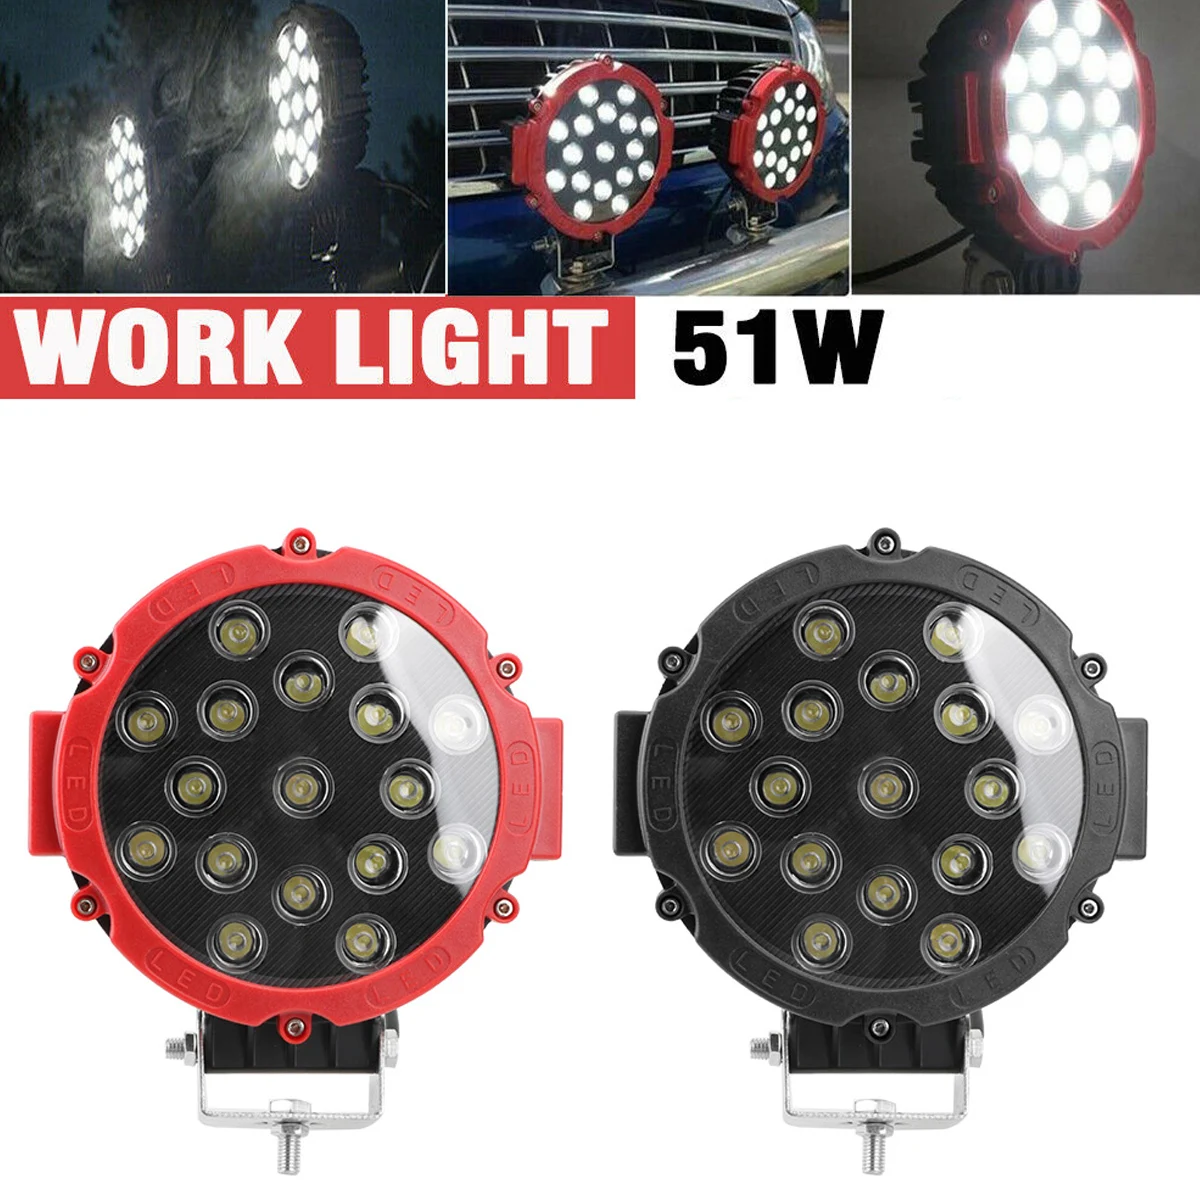 2PCS 7 Inch LED Working Light Round Headlight Fog Driving Lamp Super Bright Floodlights Universal For Truck Tractor 4x4 Off Road